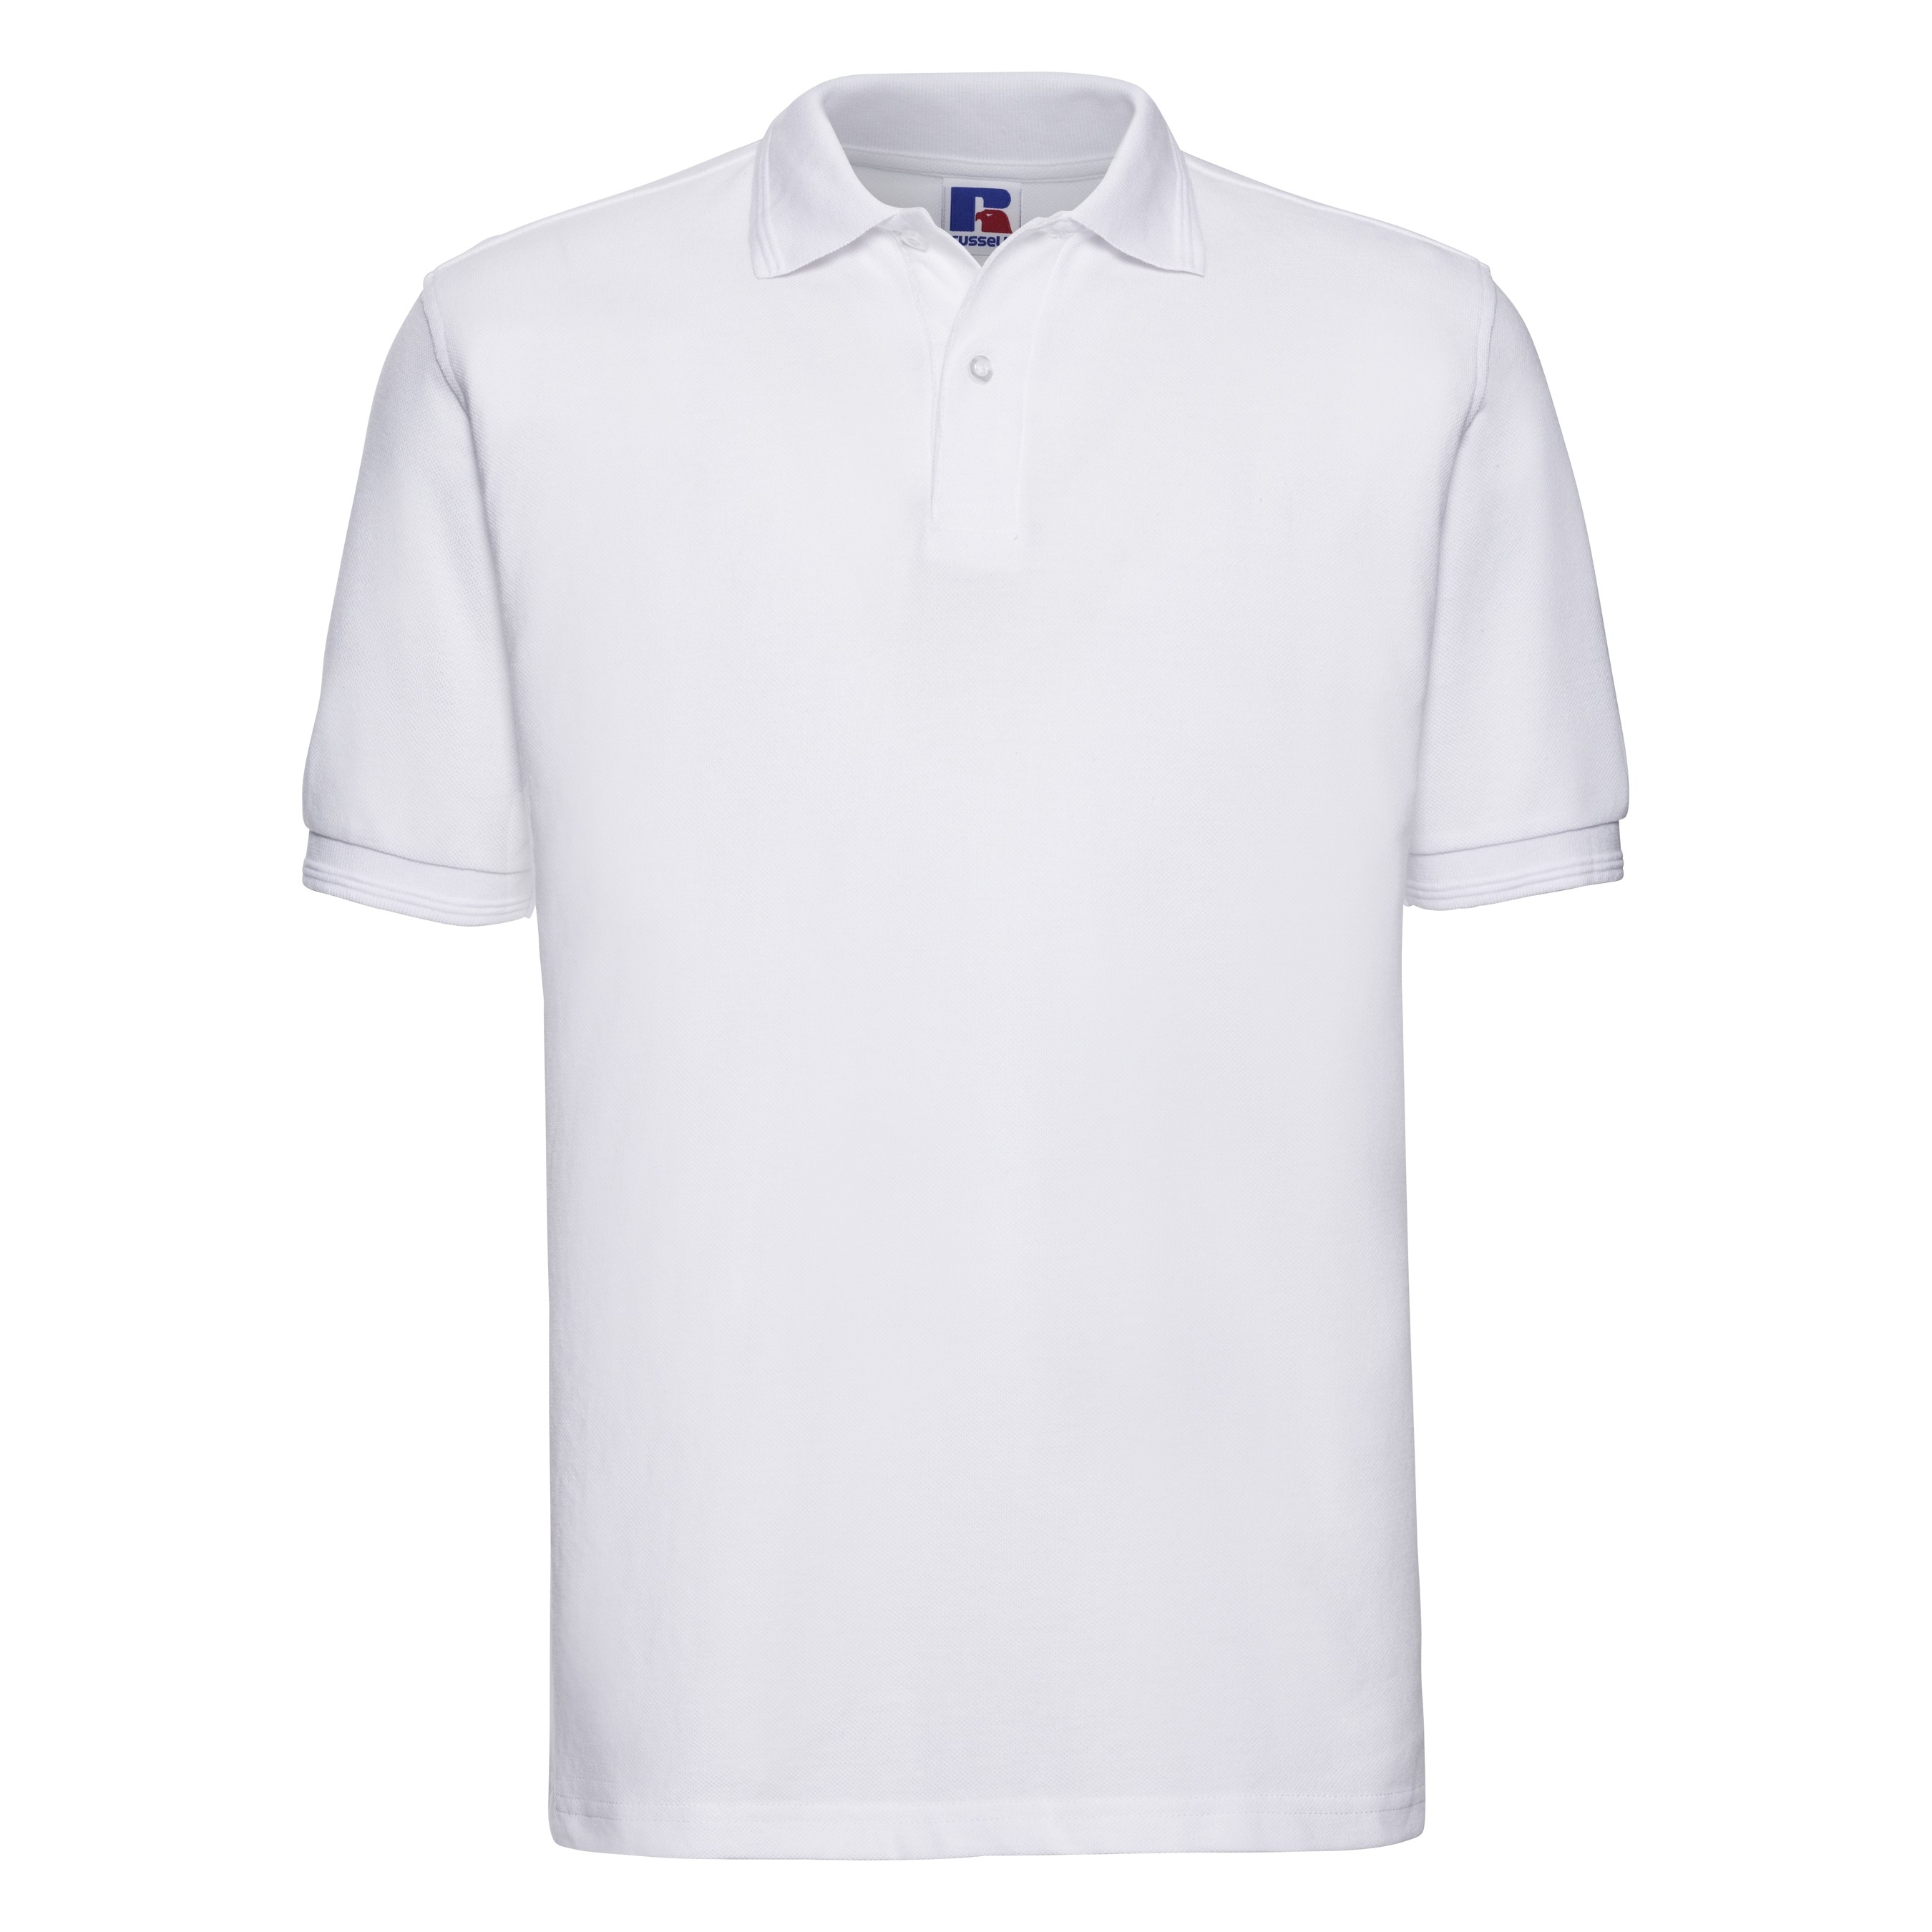 ax-httpswebsystems.s3.amazonaws.comtmp_for_downloadrussell-hardwearing-wash-polo-white.jpg